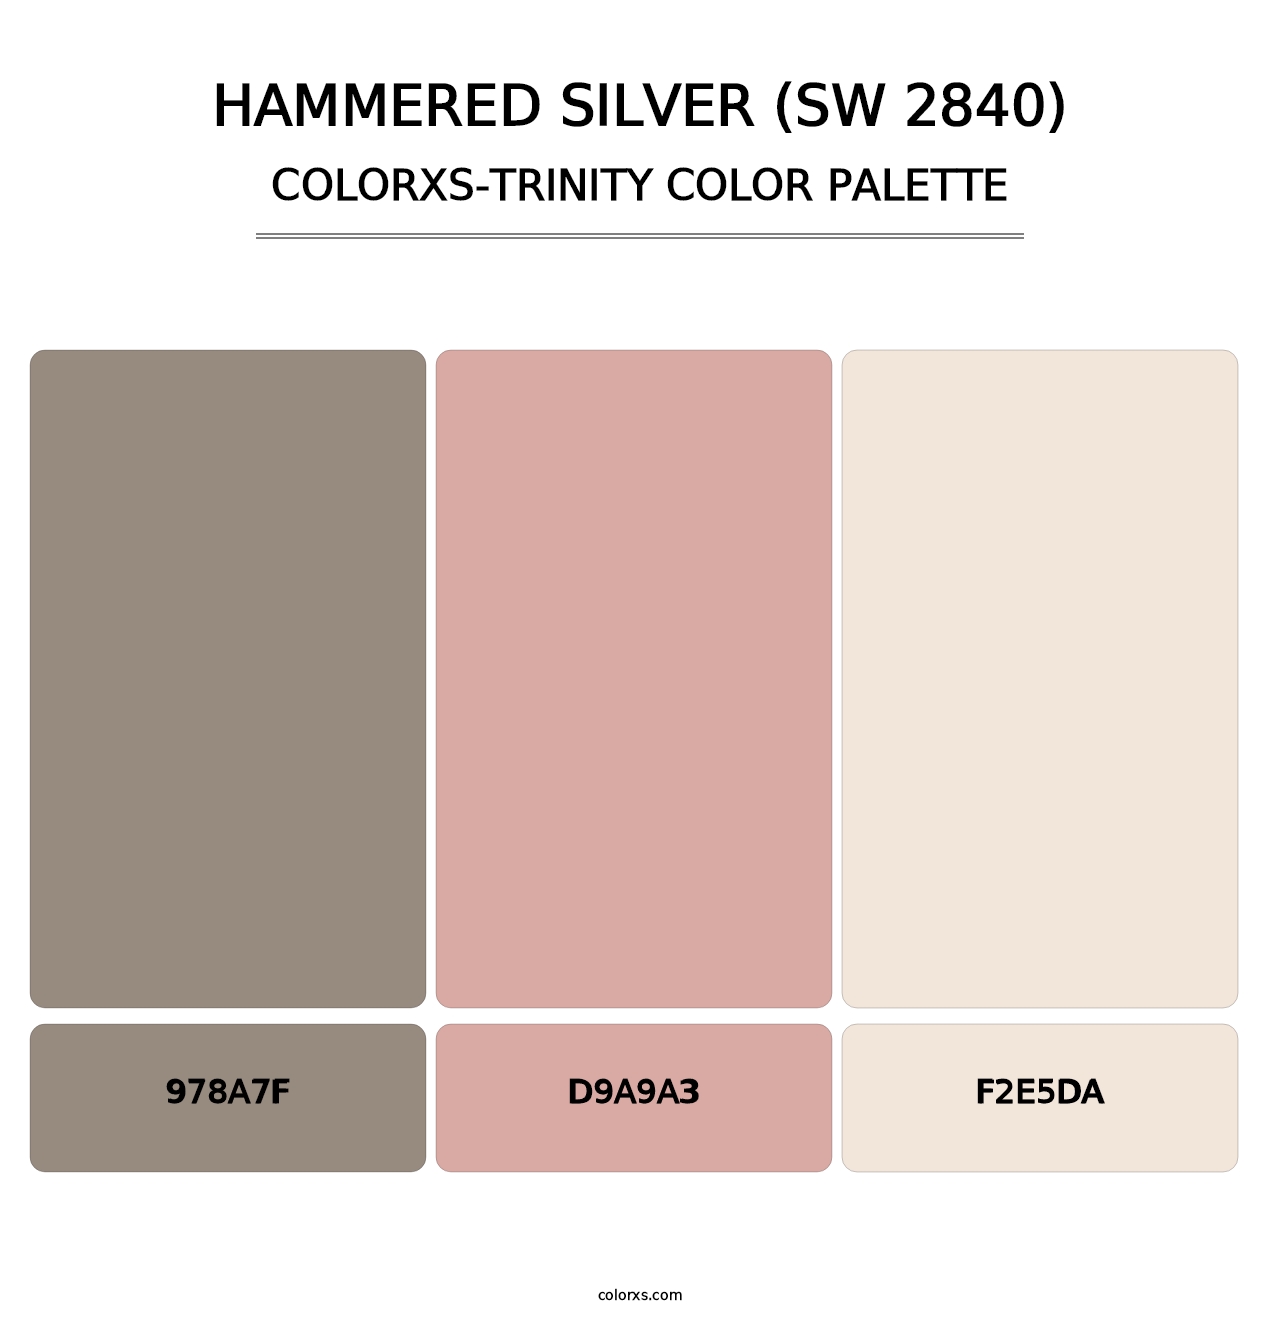 Hammered Silver (SW 2840) - Colorxs Trinity Palette